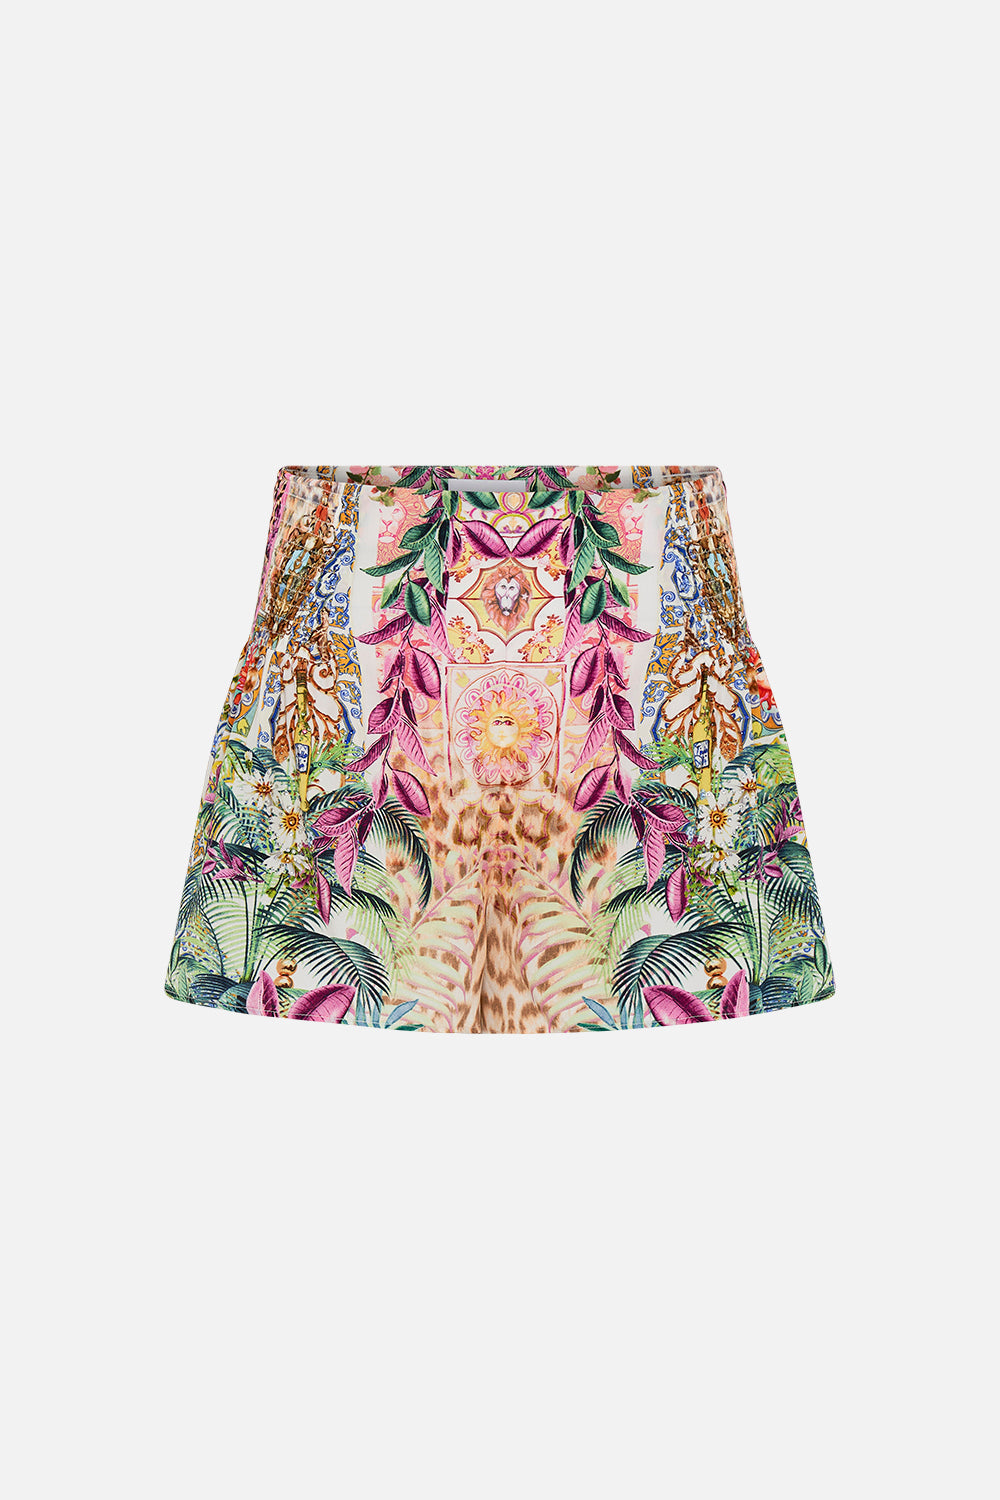 Product view of CAMILLA floral print silk shorts in Flowers of Neptune print 